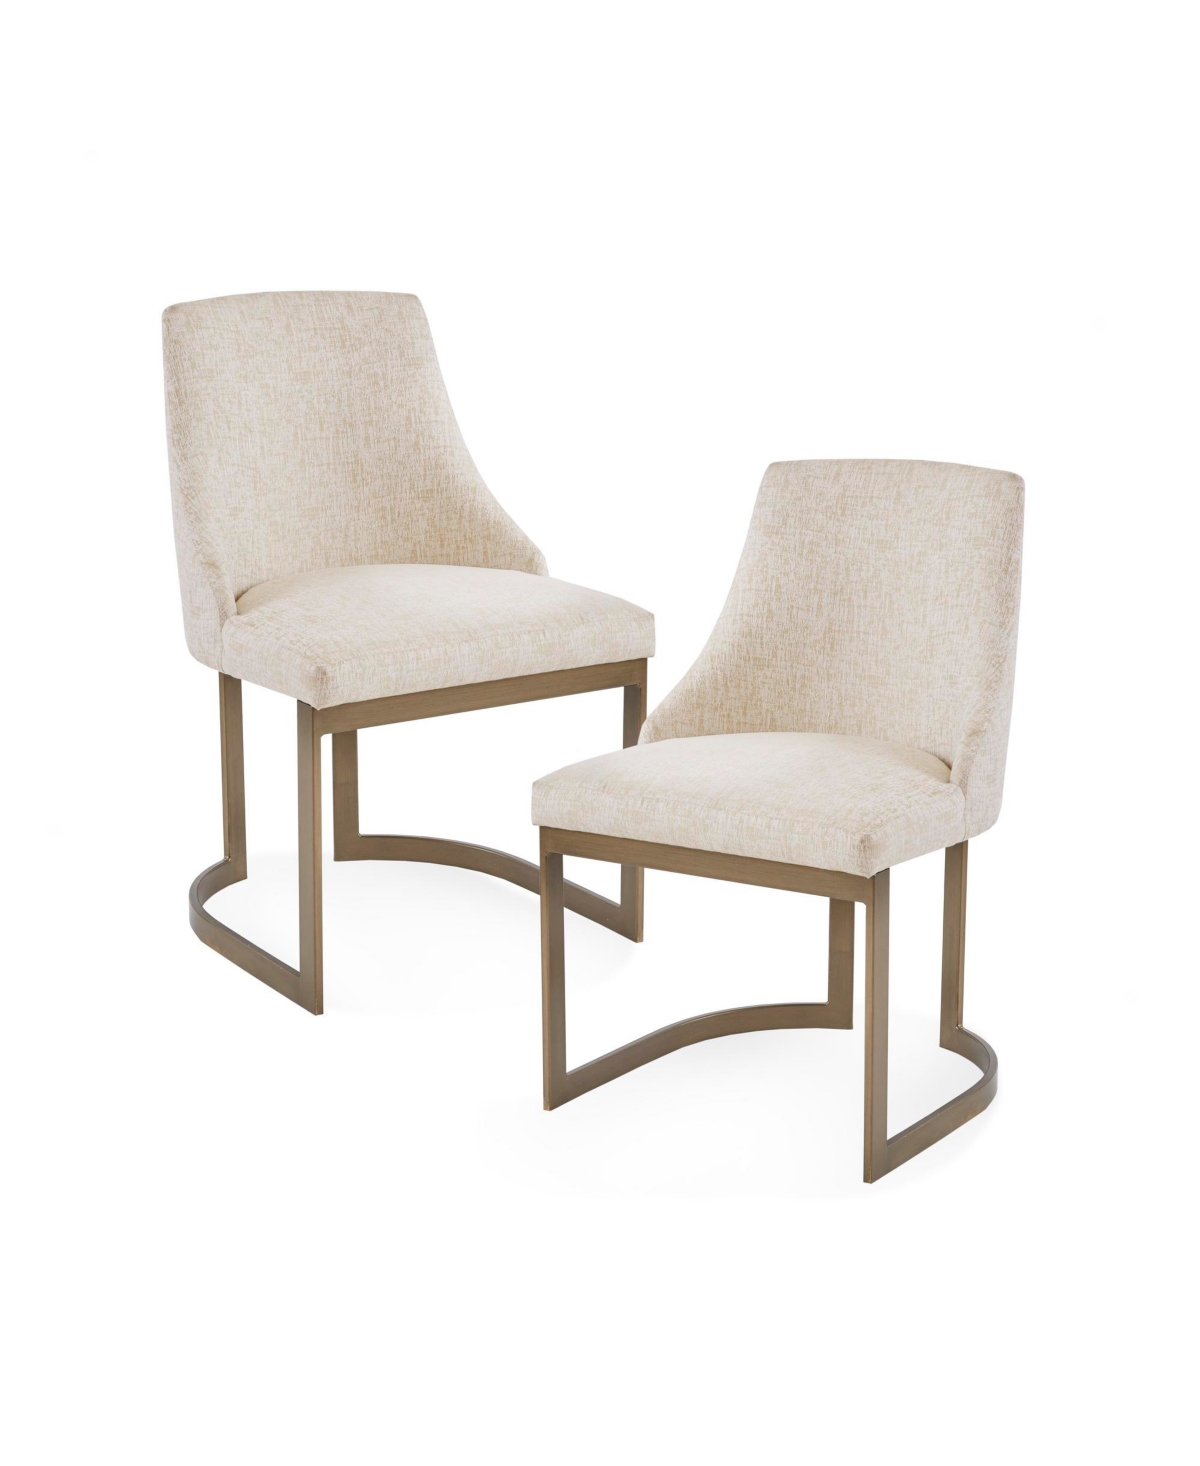 Bryce Dining Chair, Set Of 2